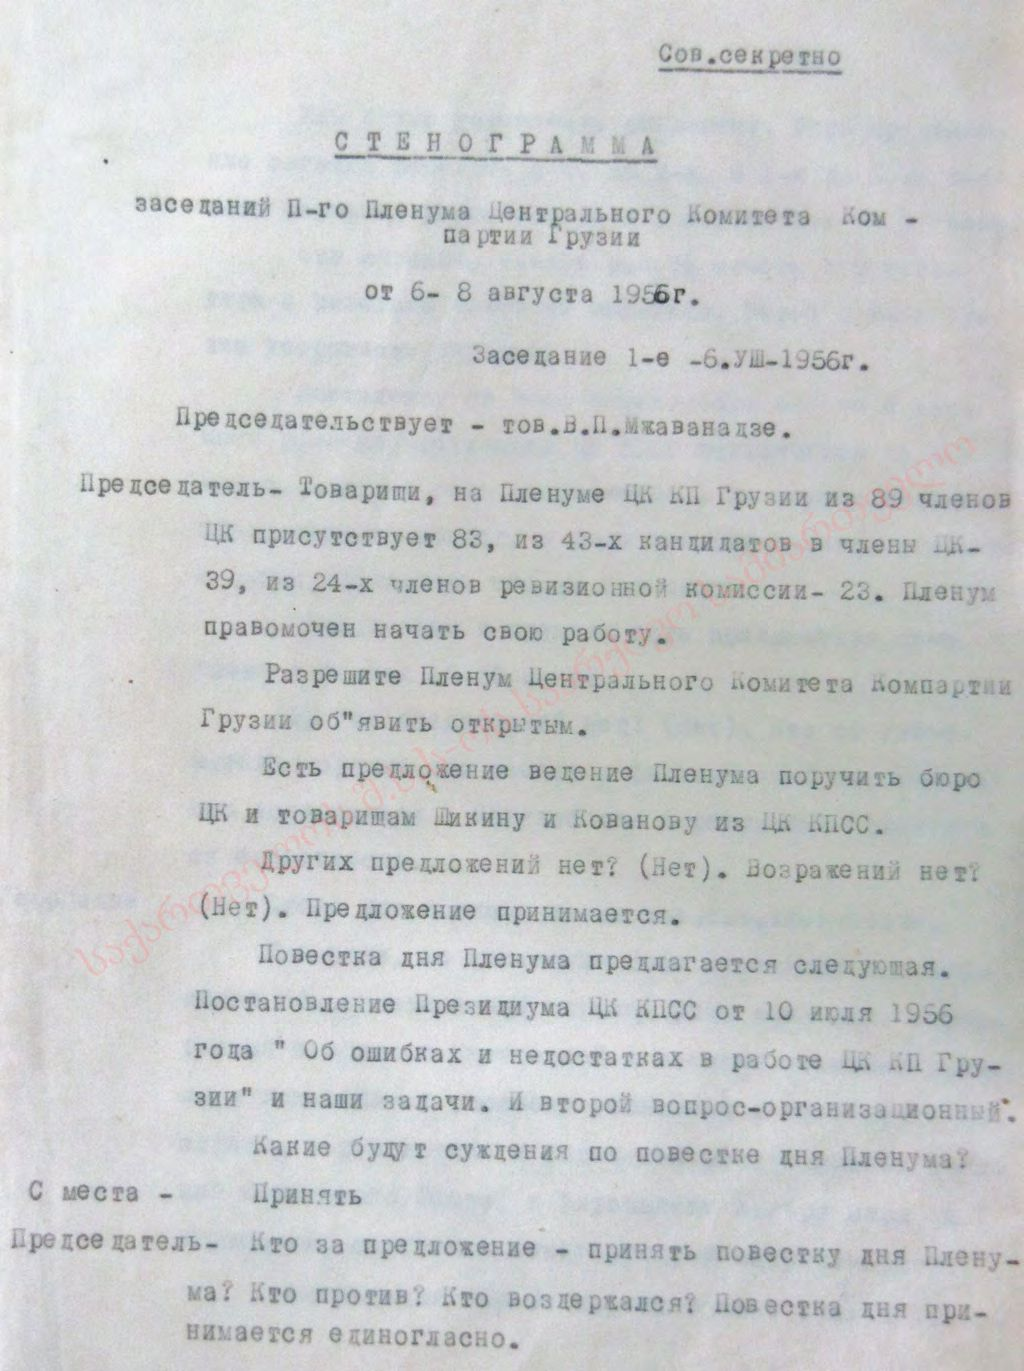  the stenographic transcript of a speech of Mzhavanadze Vasil Pavlovich - the First Secretary of Central Committee of Communist Party of Georgia at the II Plenum of the Central Committee of Communist Party of Georgia on August 6-8, 1956.